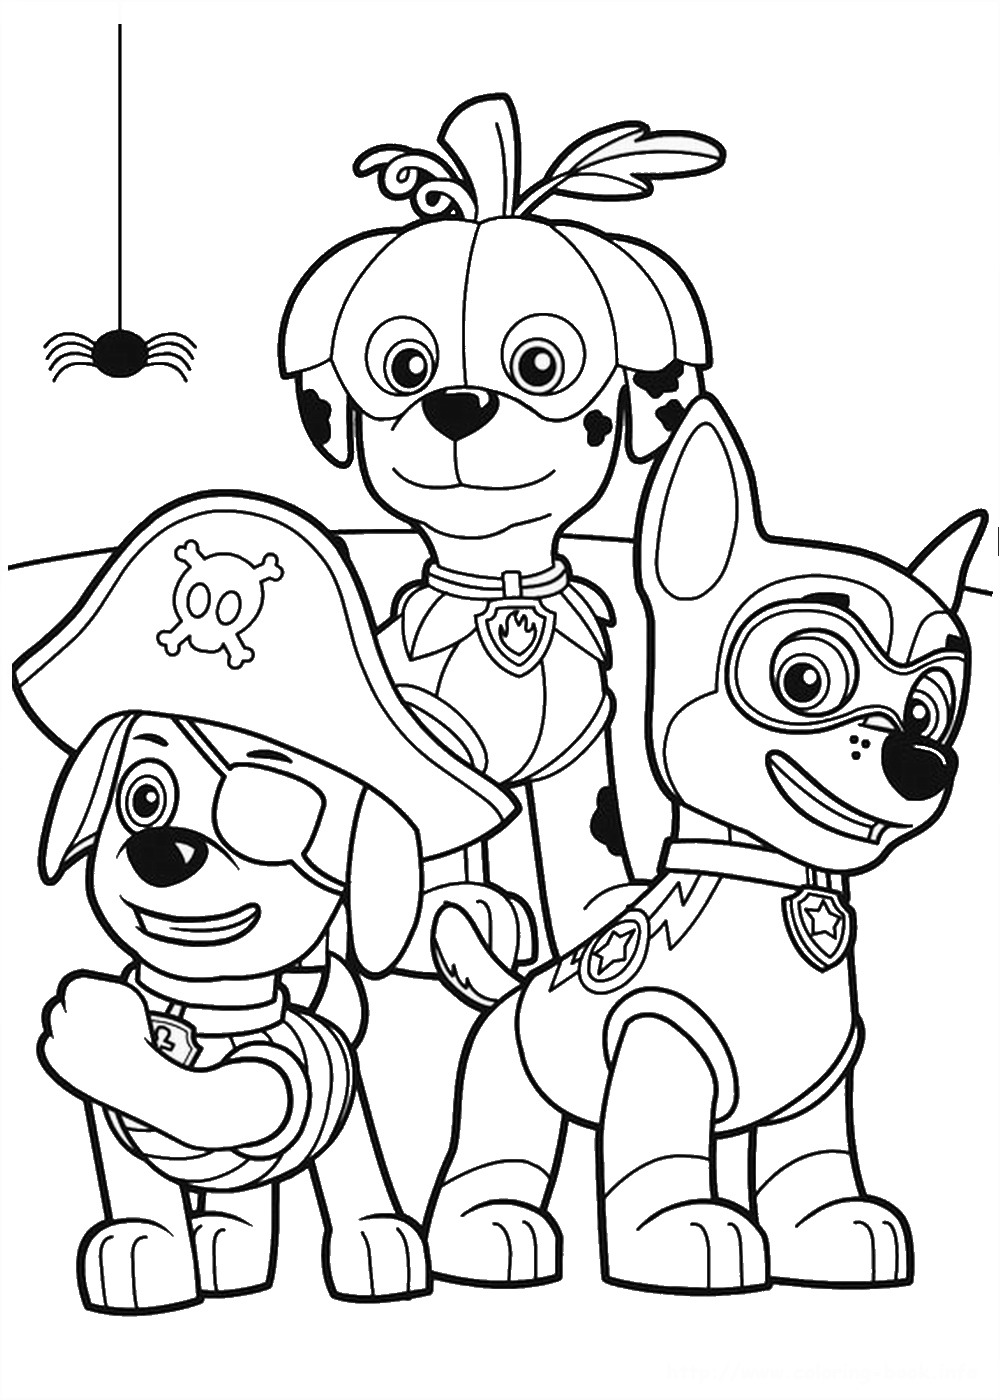 Paw Patrol Coloring Pages FREE Printable 73